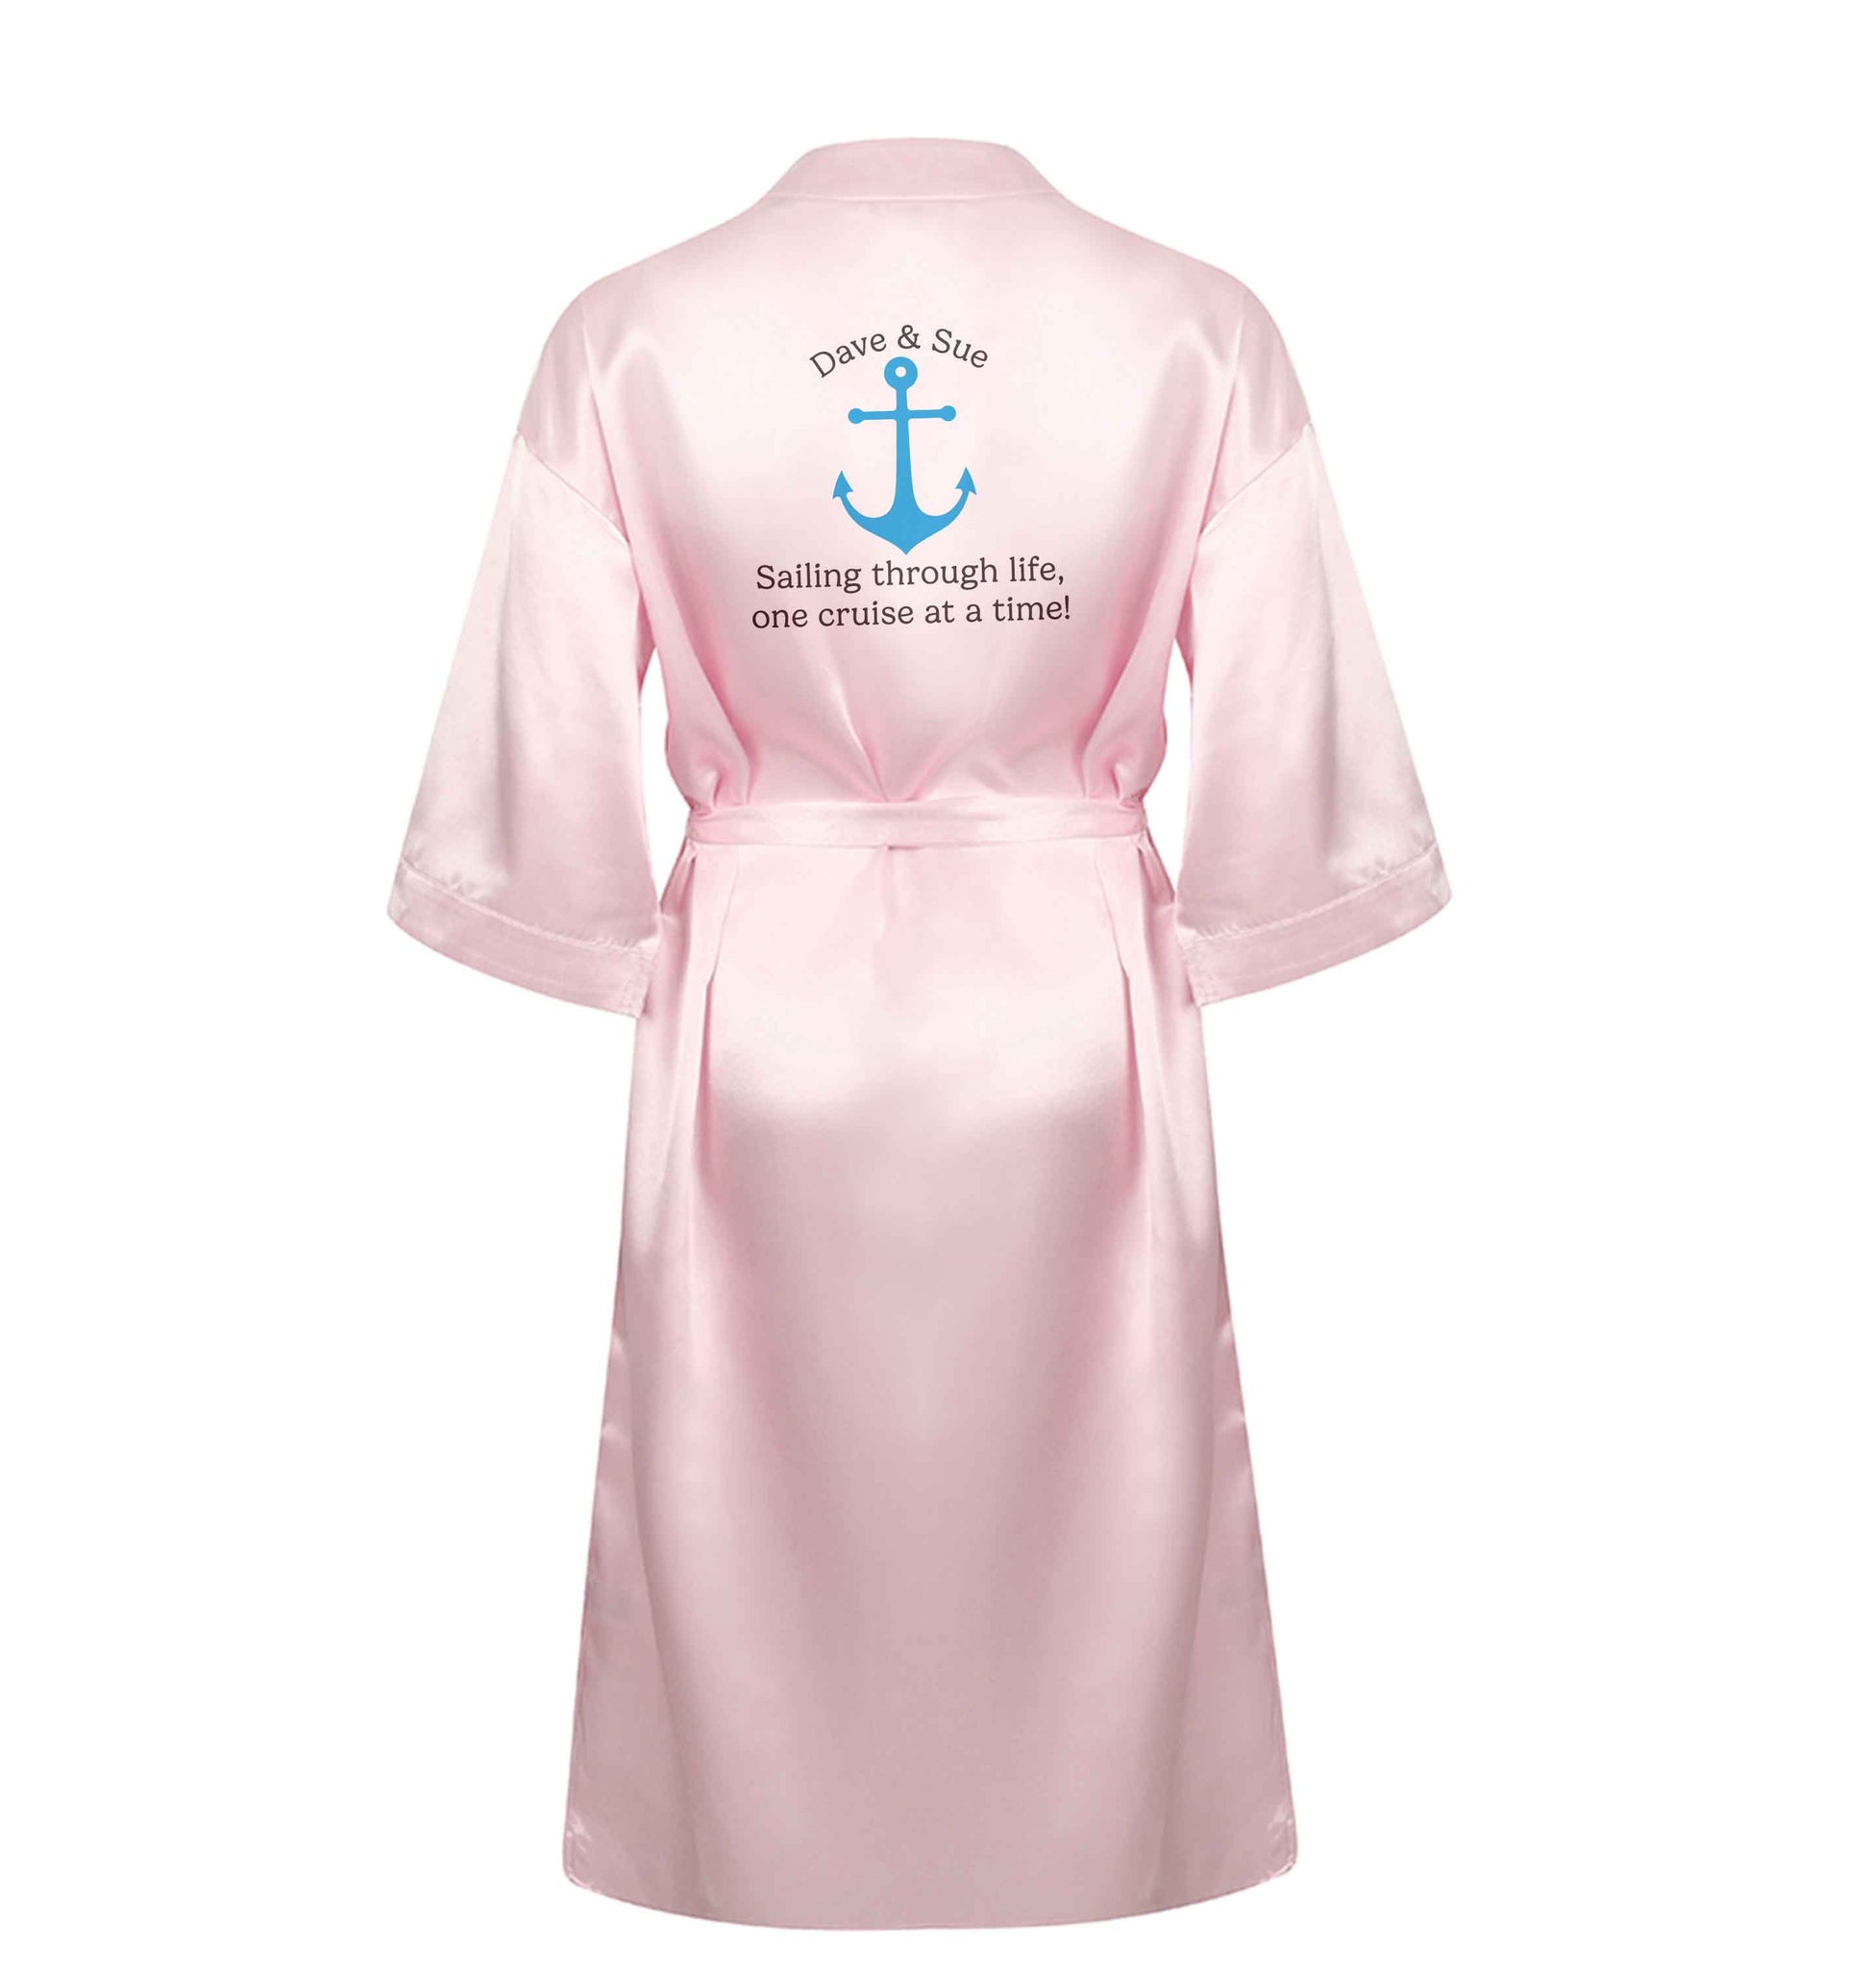 Sailing through life one cruise at a time - personalised XL/XXL pink ladies dressing gown size 16/18